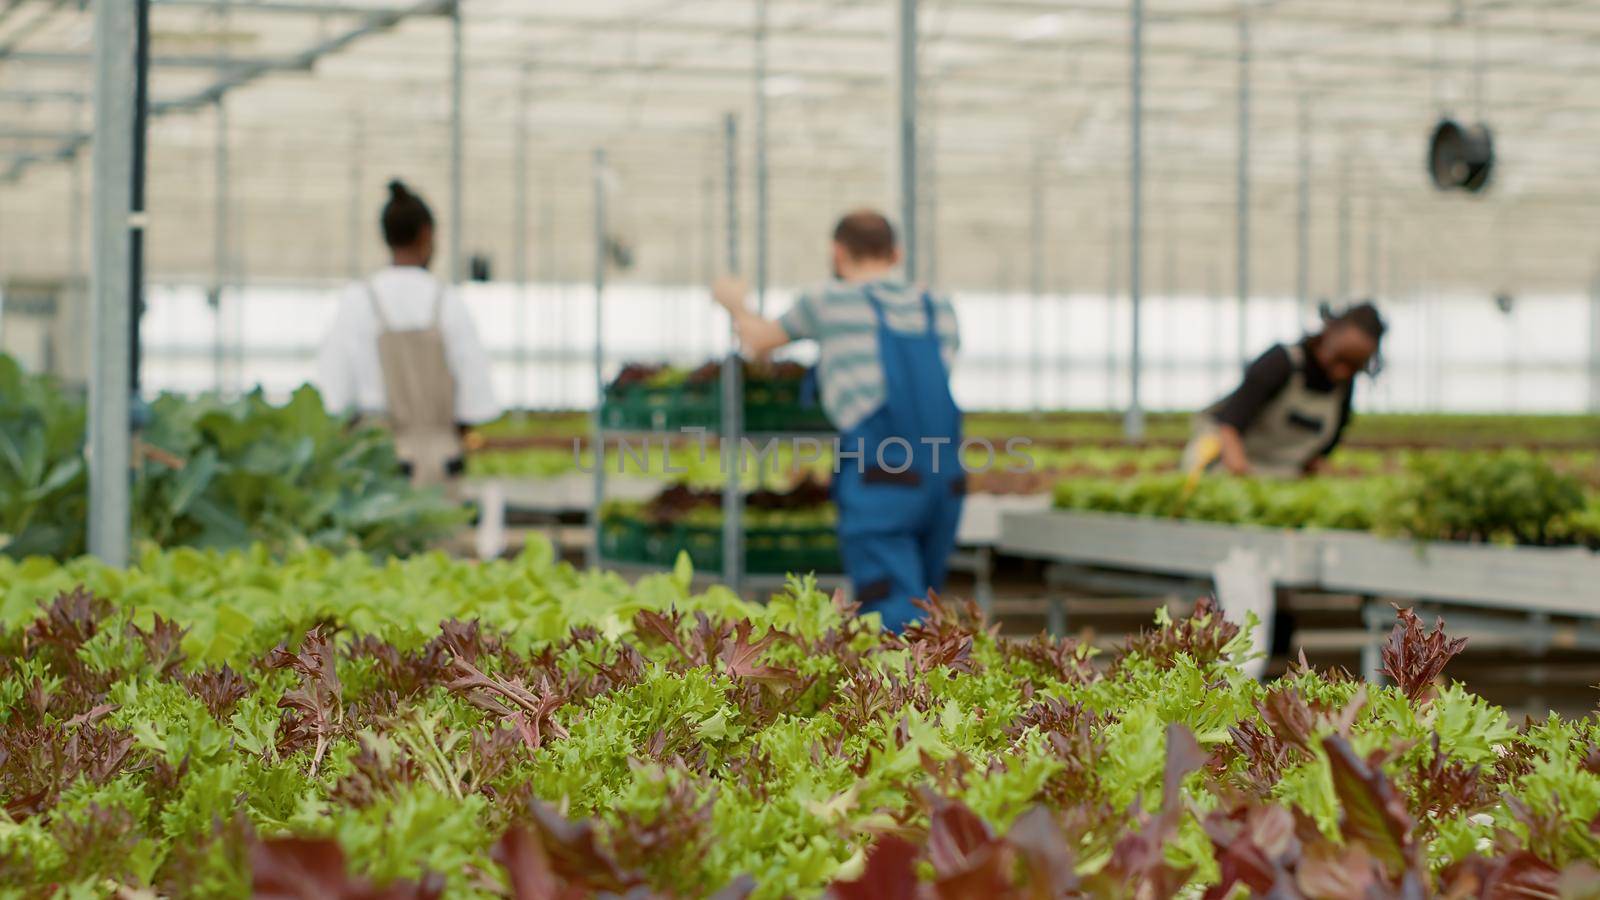 Closeup of green lettuce in organic farm being cultivated without pesticides with diverse farm workers pushing crates with crop. Selective focus on bio vegetables in greenhouse ready for harvest.